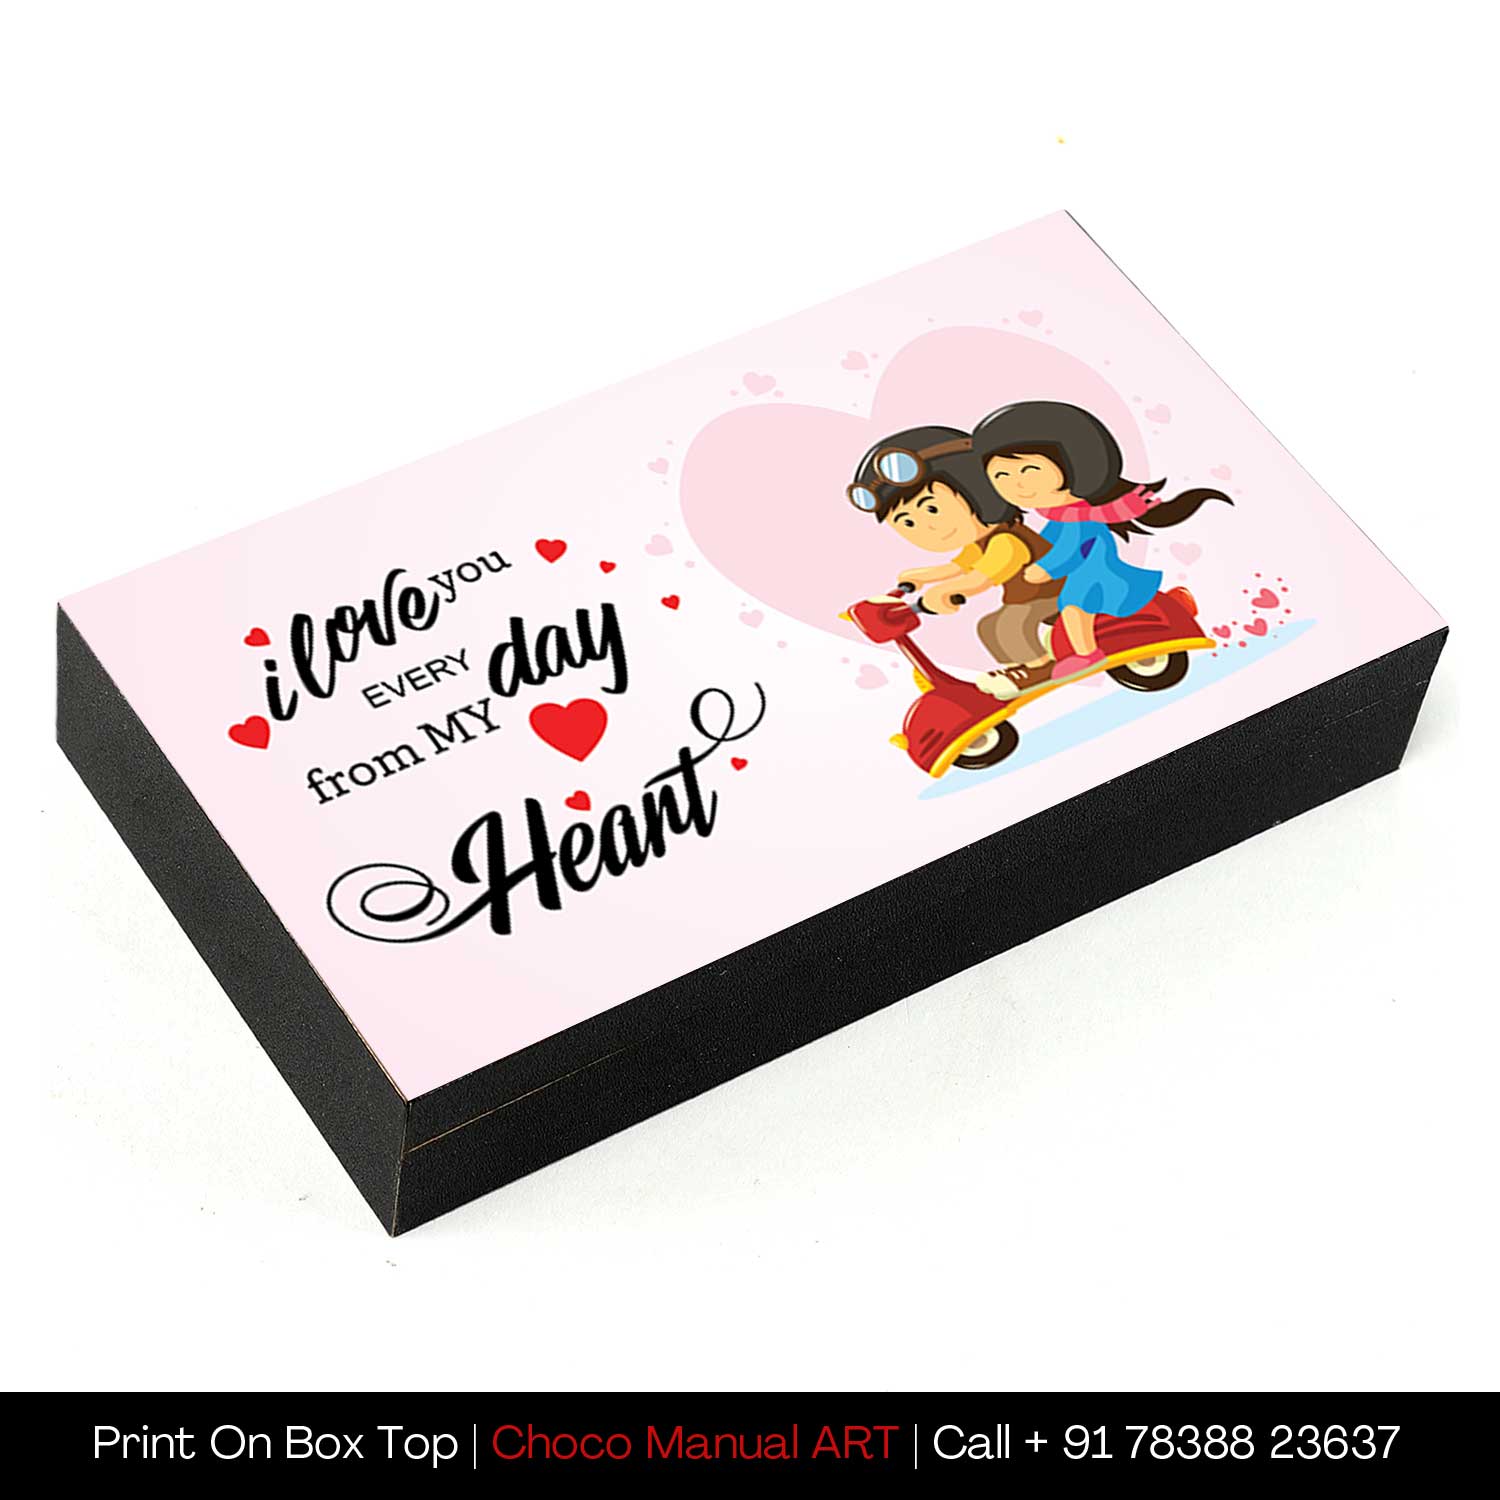 Buy I Love You Customised Chocolate Online In India